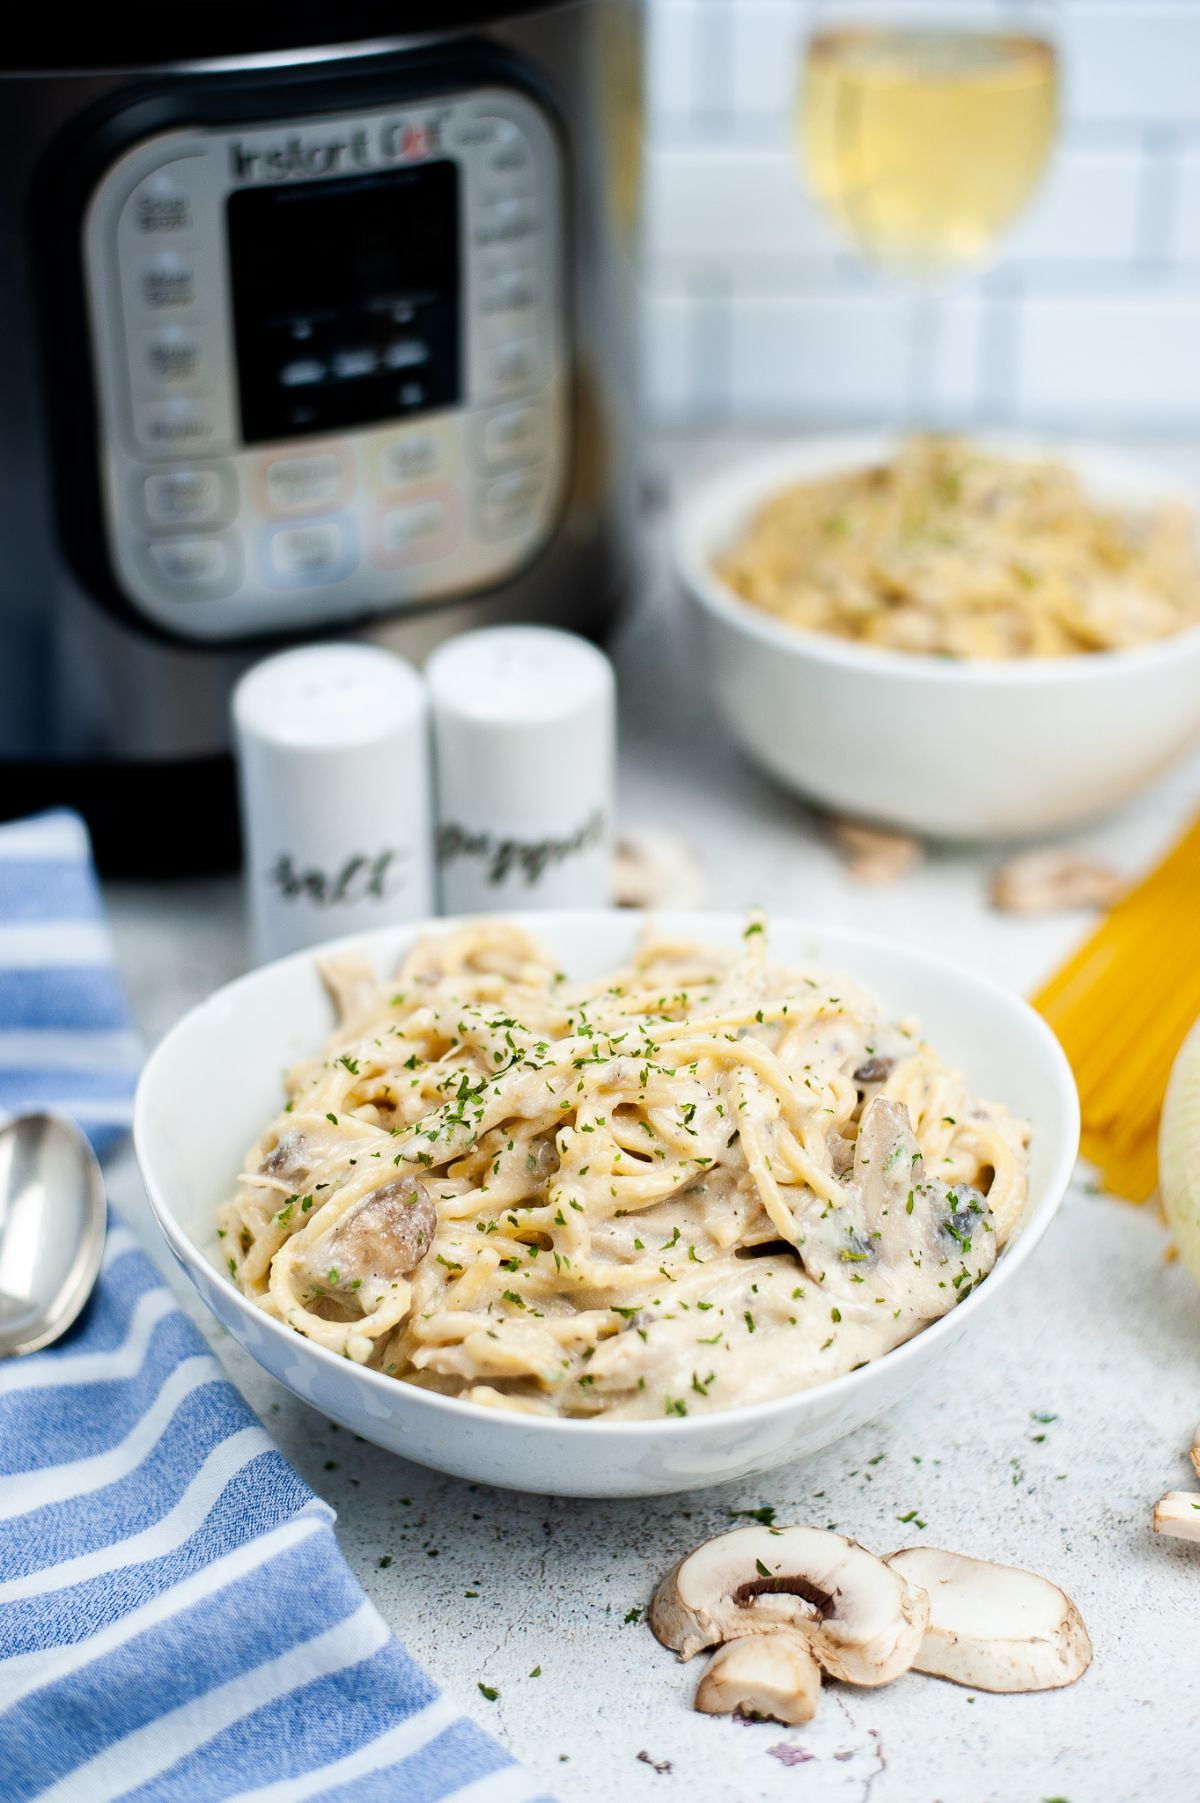 Instant Pot Chicken Tetrazzini in white serving bowl with the instant pot blurred in the background.